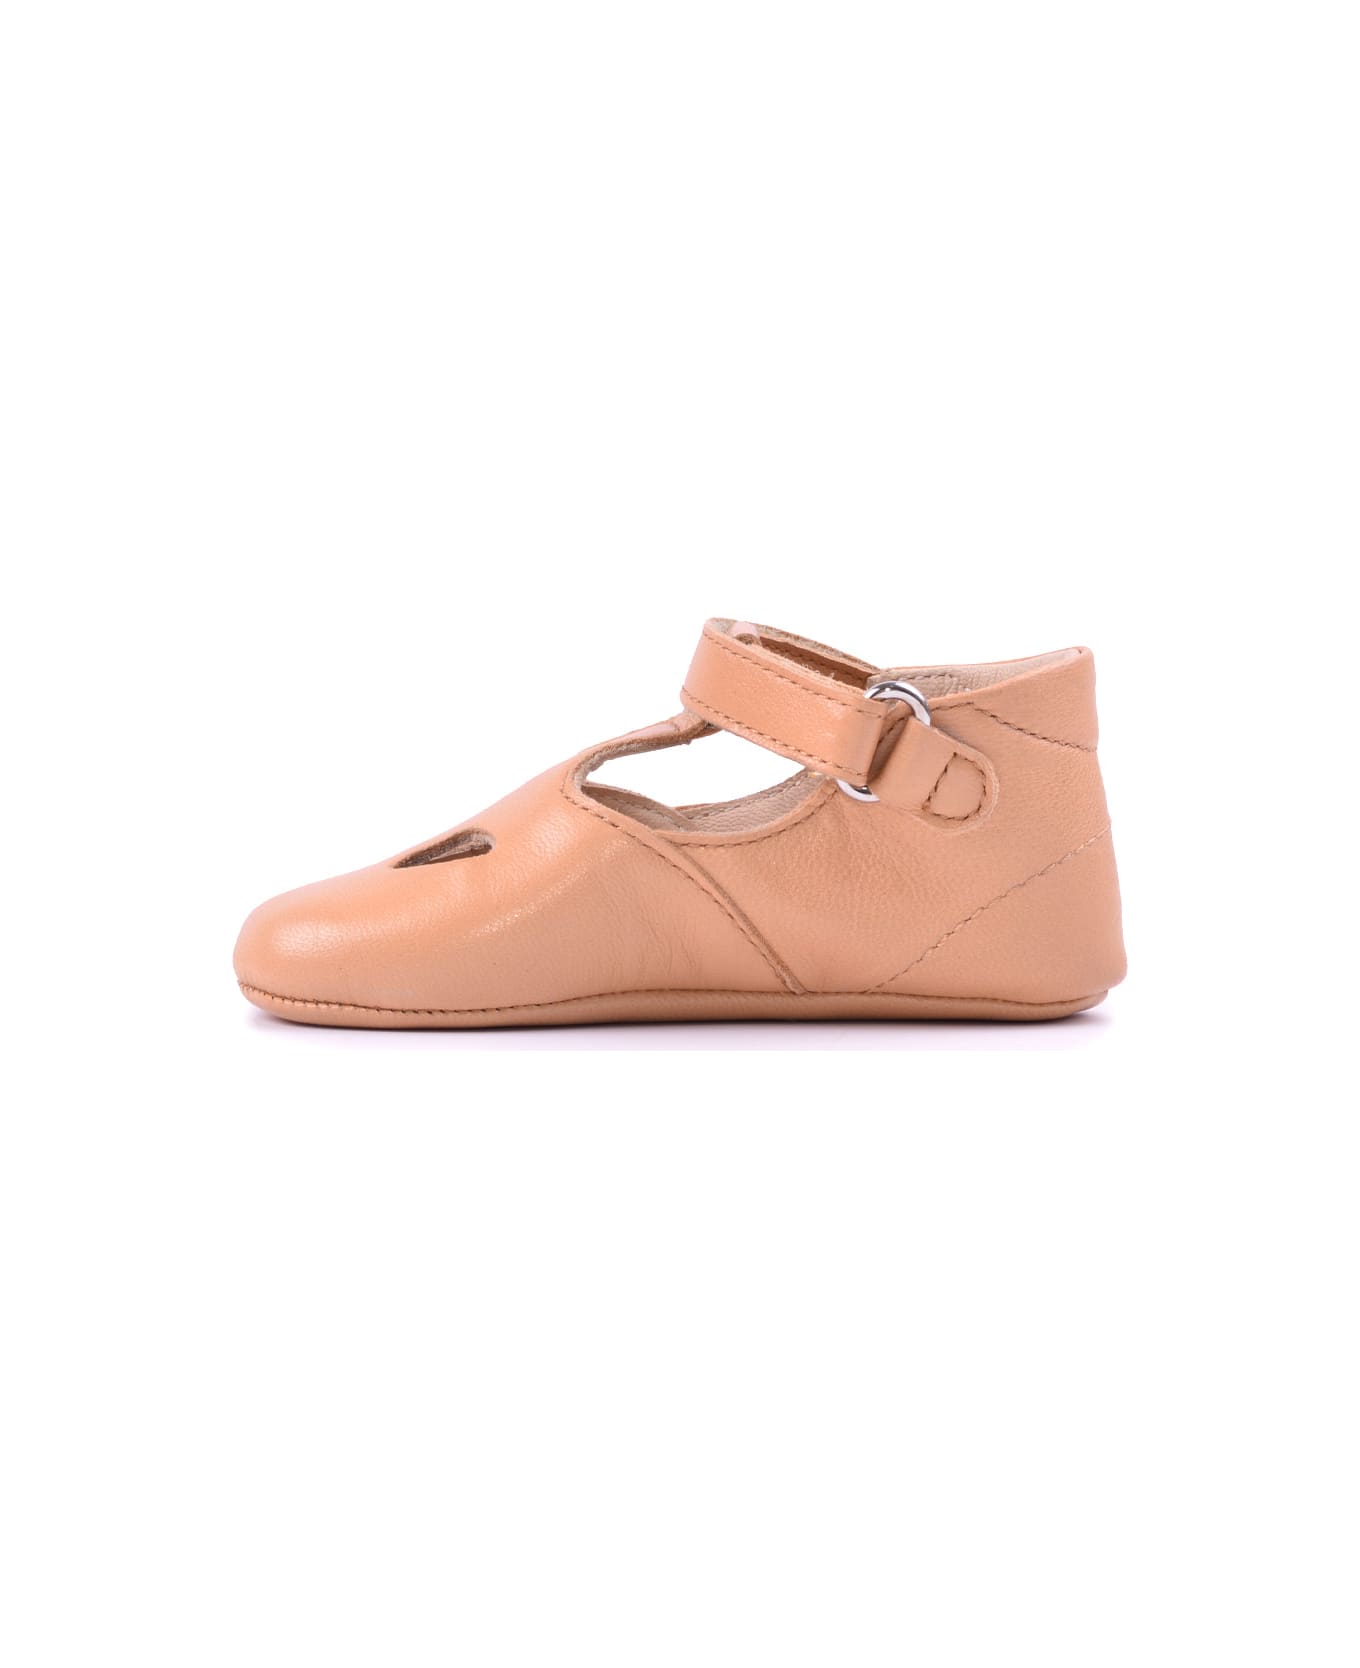 Gallucci Leather Shoes With Buckle - Beige